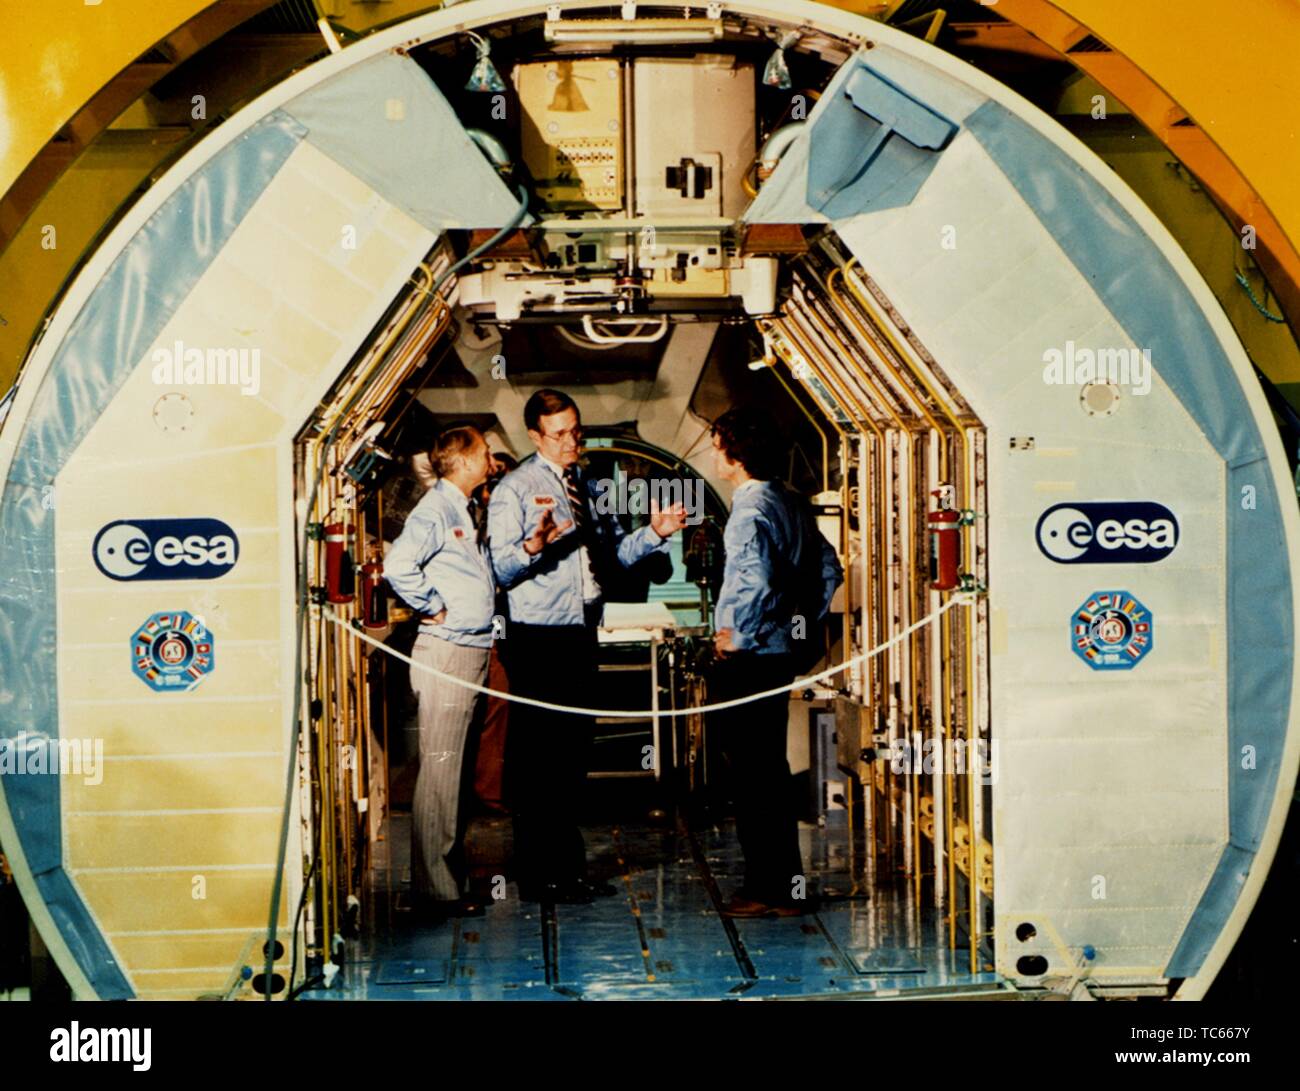 Astronaut Owen K Garriott, Vice President George Bush, and Ulf Merbold of West Germany inside Spacelab in the Operations and Checkout Building at Kennedy Space Center, Merritt Island, Florida, February 5, 1982. Image courtesy National Aeronautics and Space Administration (NASA). () Stock Photo